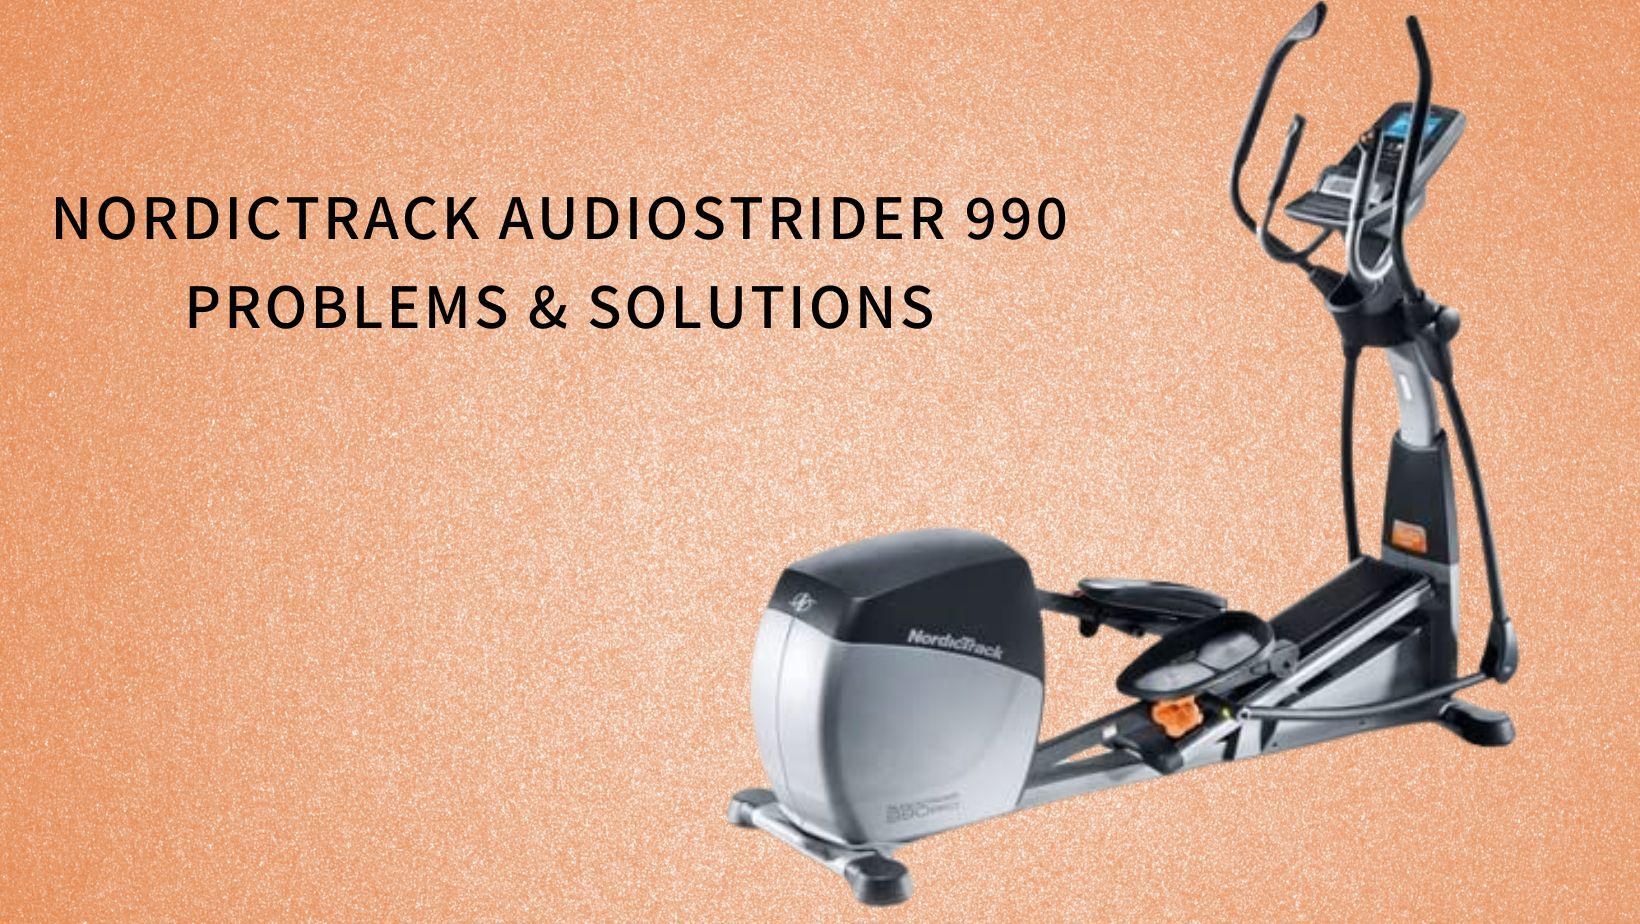 Nordictrack Audiostrider 990 Problems & Solutions